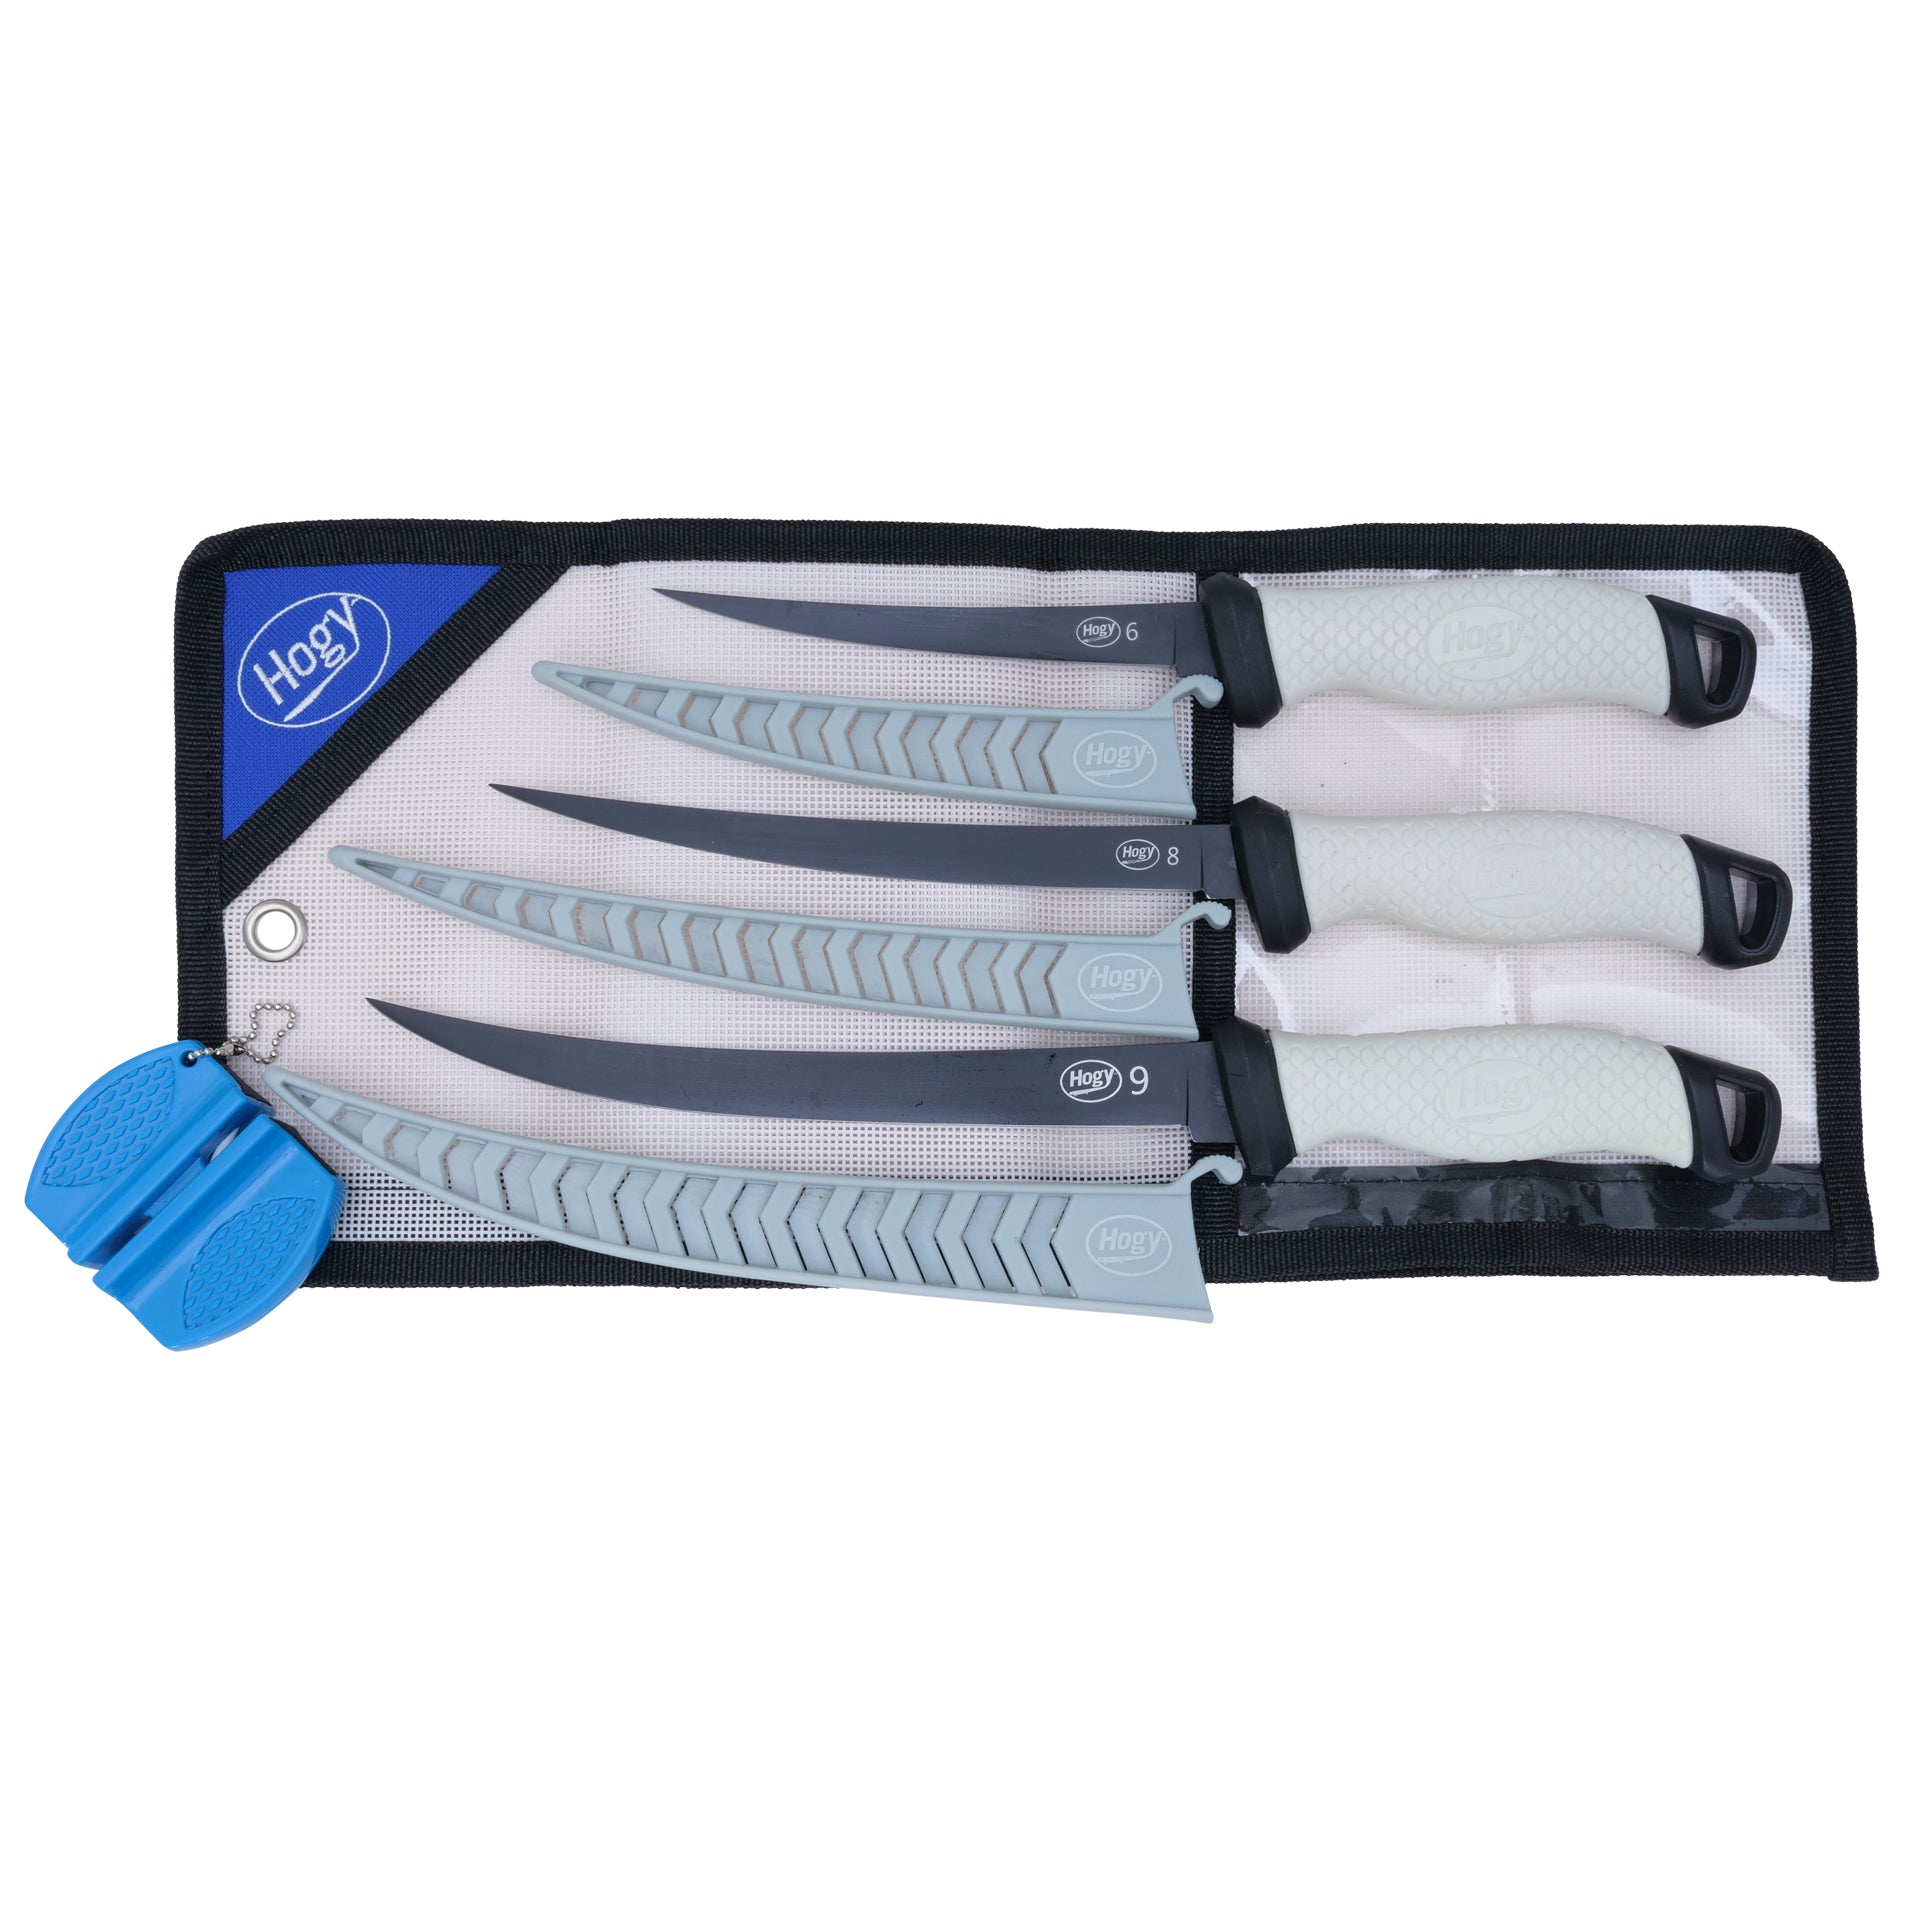 Wicked Edge Kitchen Knife Sheaths (pack of 4)